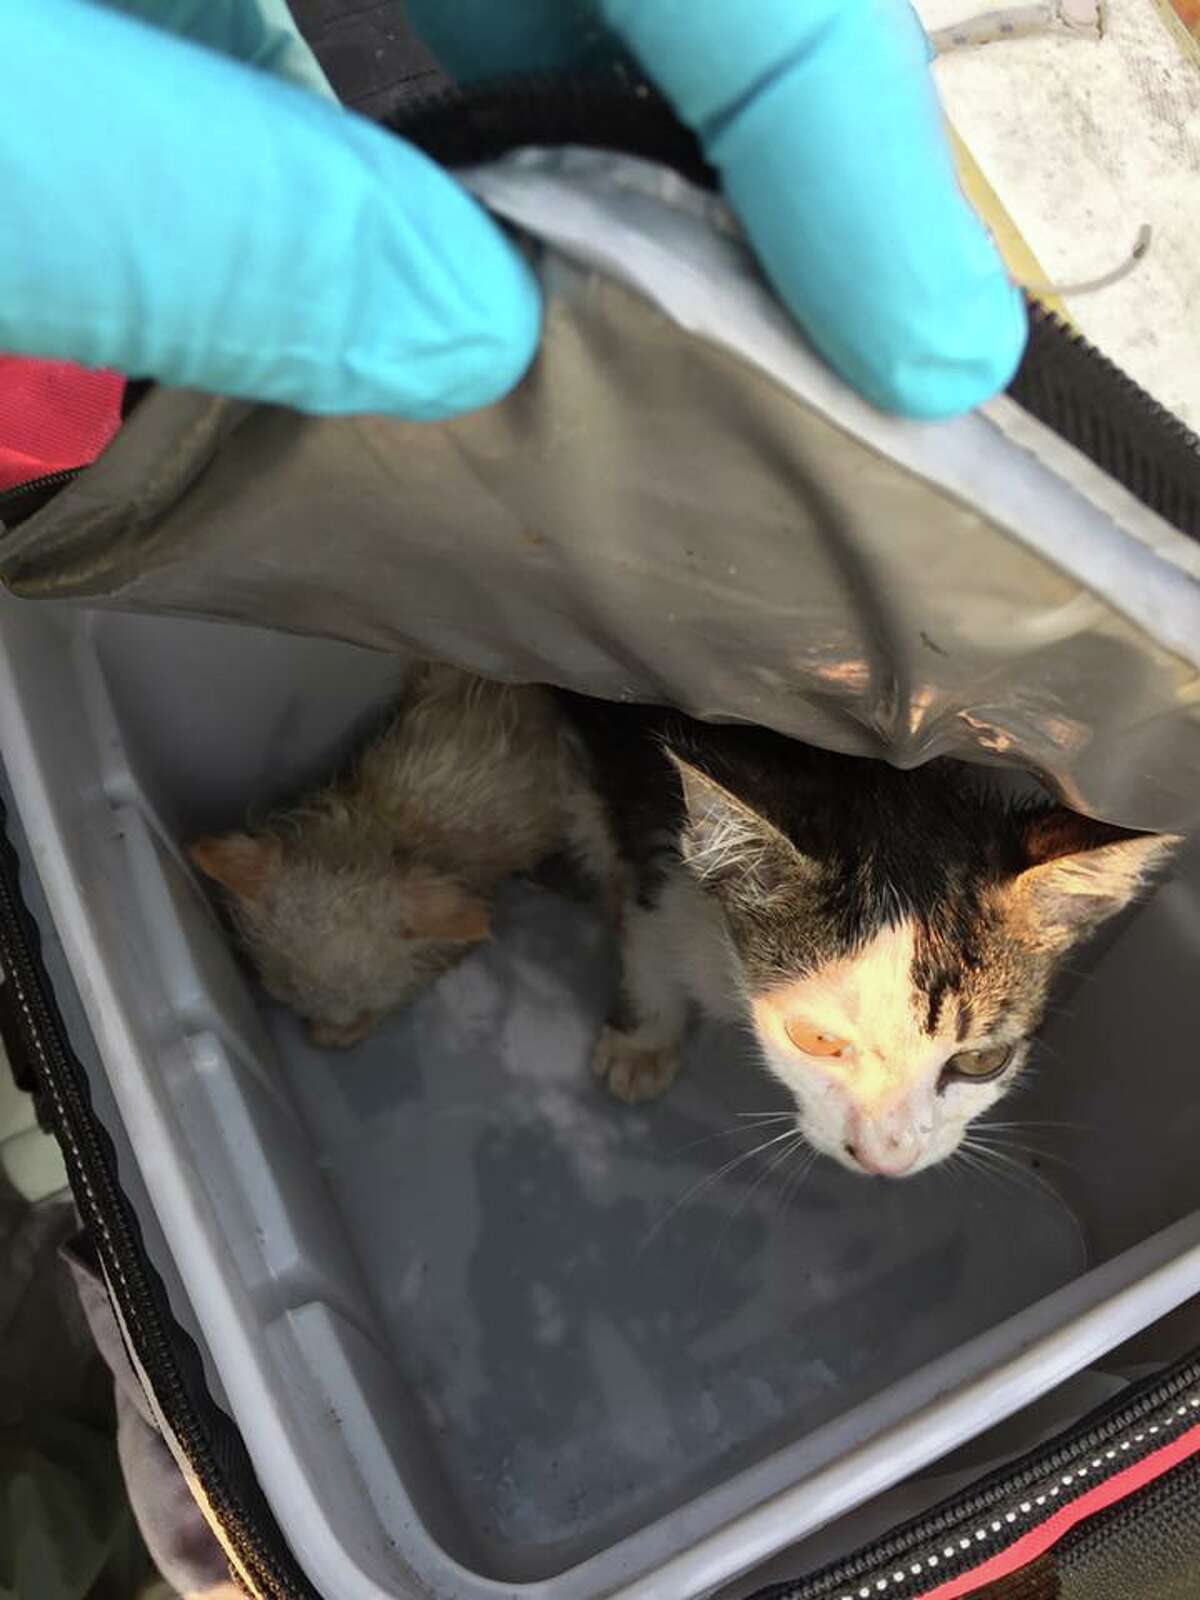 Kittens were left for dead on a boat in San Rafael, according to the Sheriff's Office.